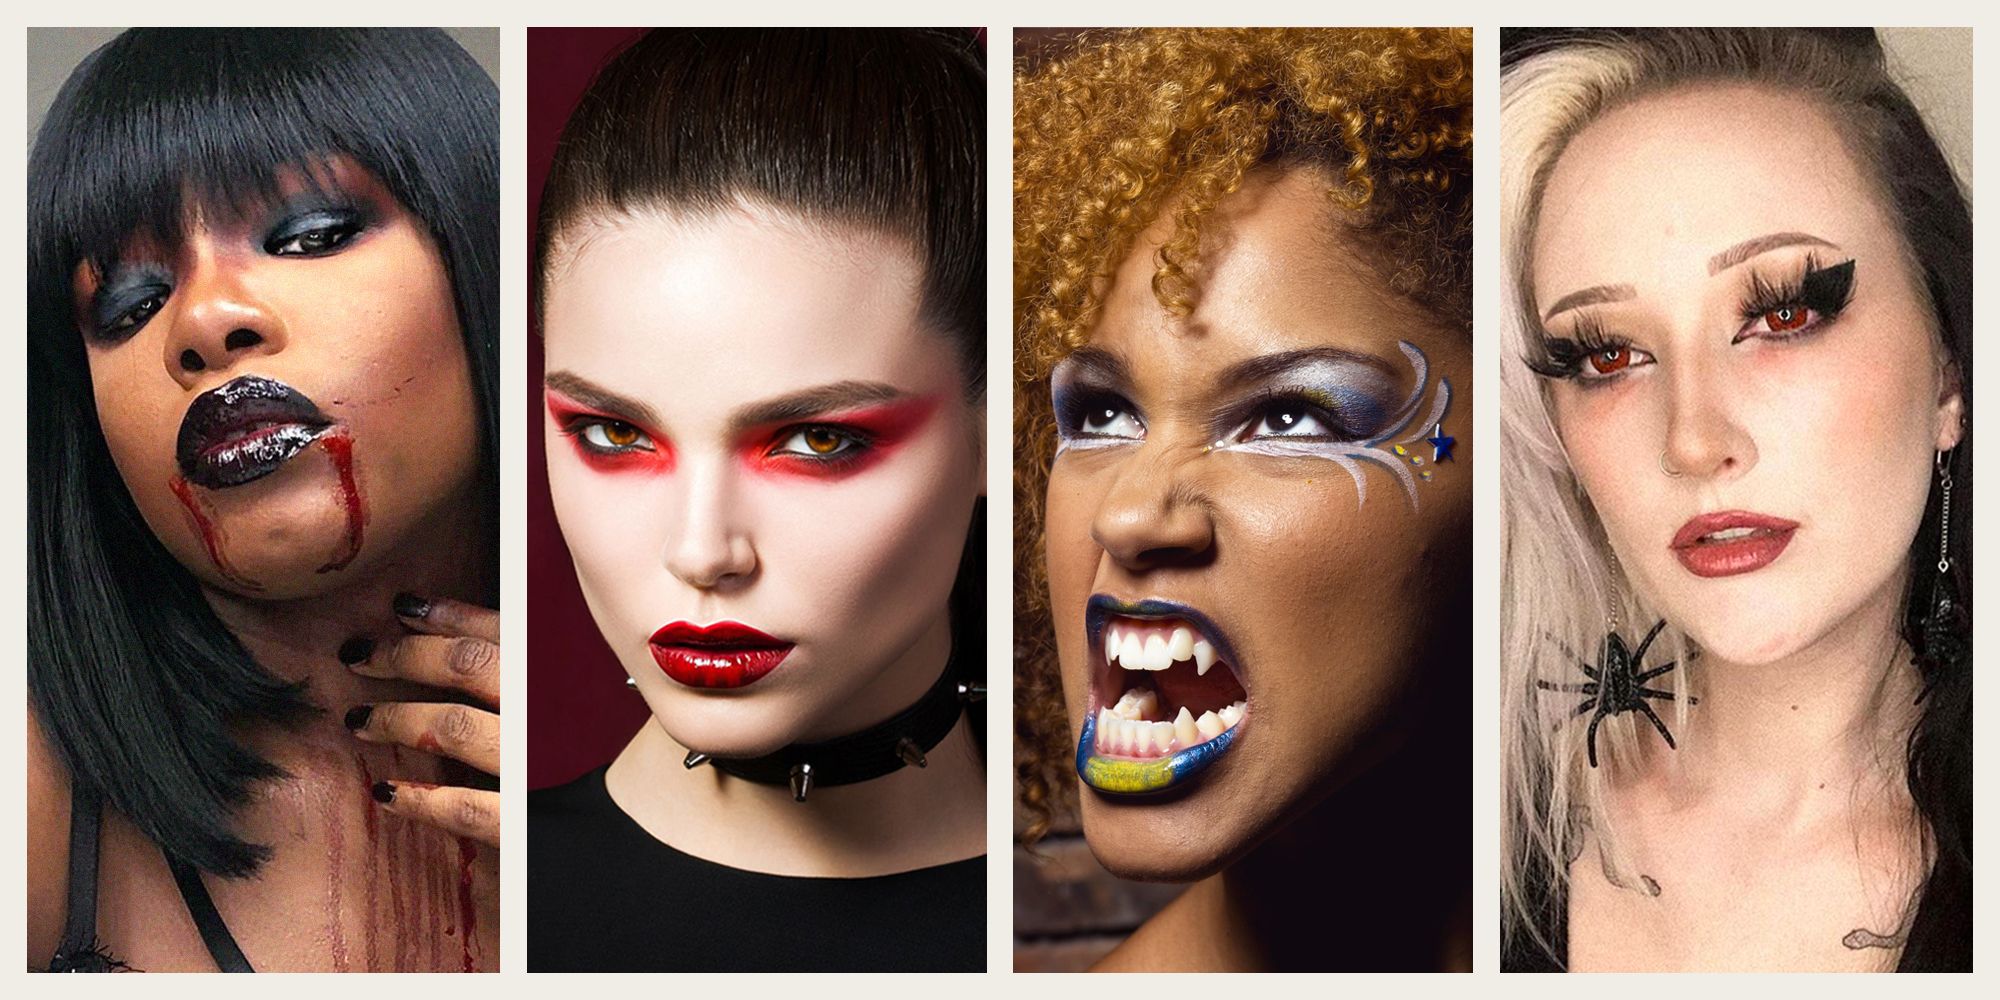 skære ned Kør væk assistent 10 Cute and Scary Vampire Makeup Ideas and Tutorials 2021